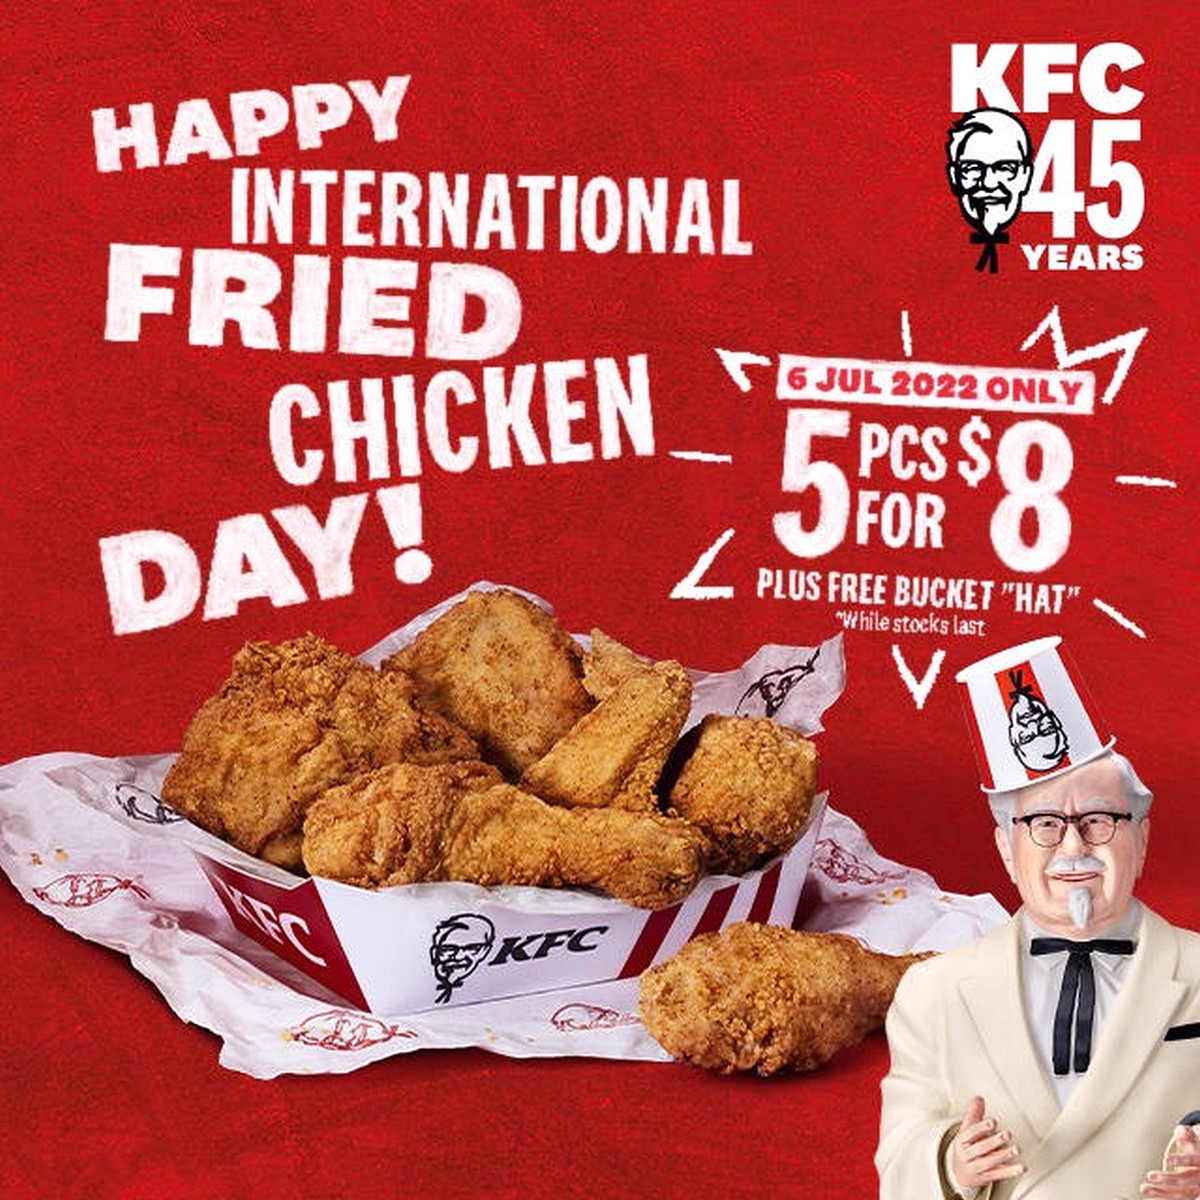 KFC-Singapore-Free-Bucket-Hat-5-for-SGD8-Fried-Chicken-Promotion-2022-Food-Offers-Restaurant-Fast 6 Jul 2022: KFC 5 for $8 Fried Chickens Deal Promotion at Islandwide Singapore